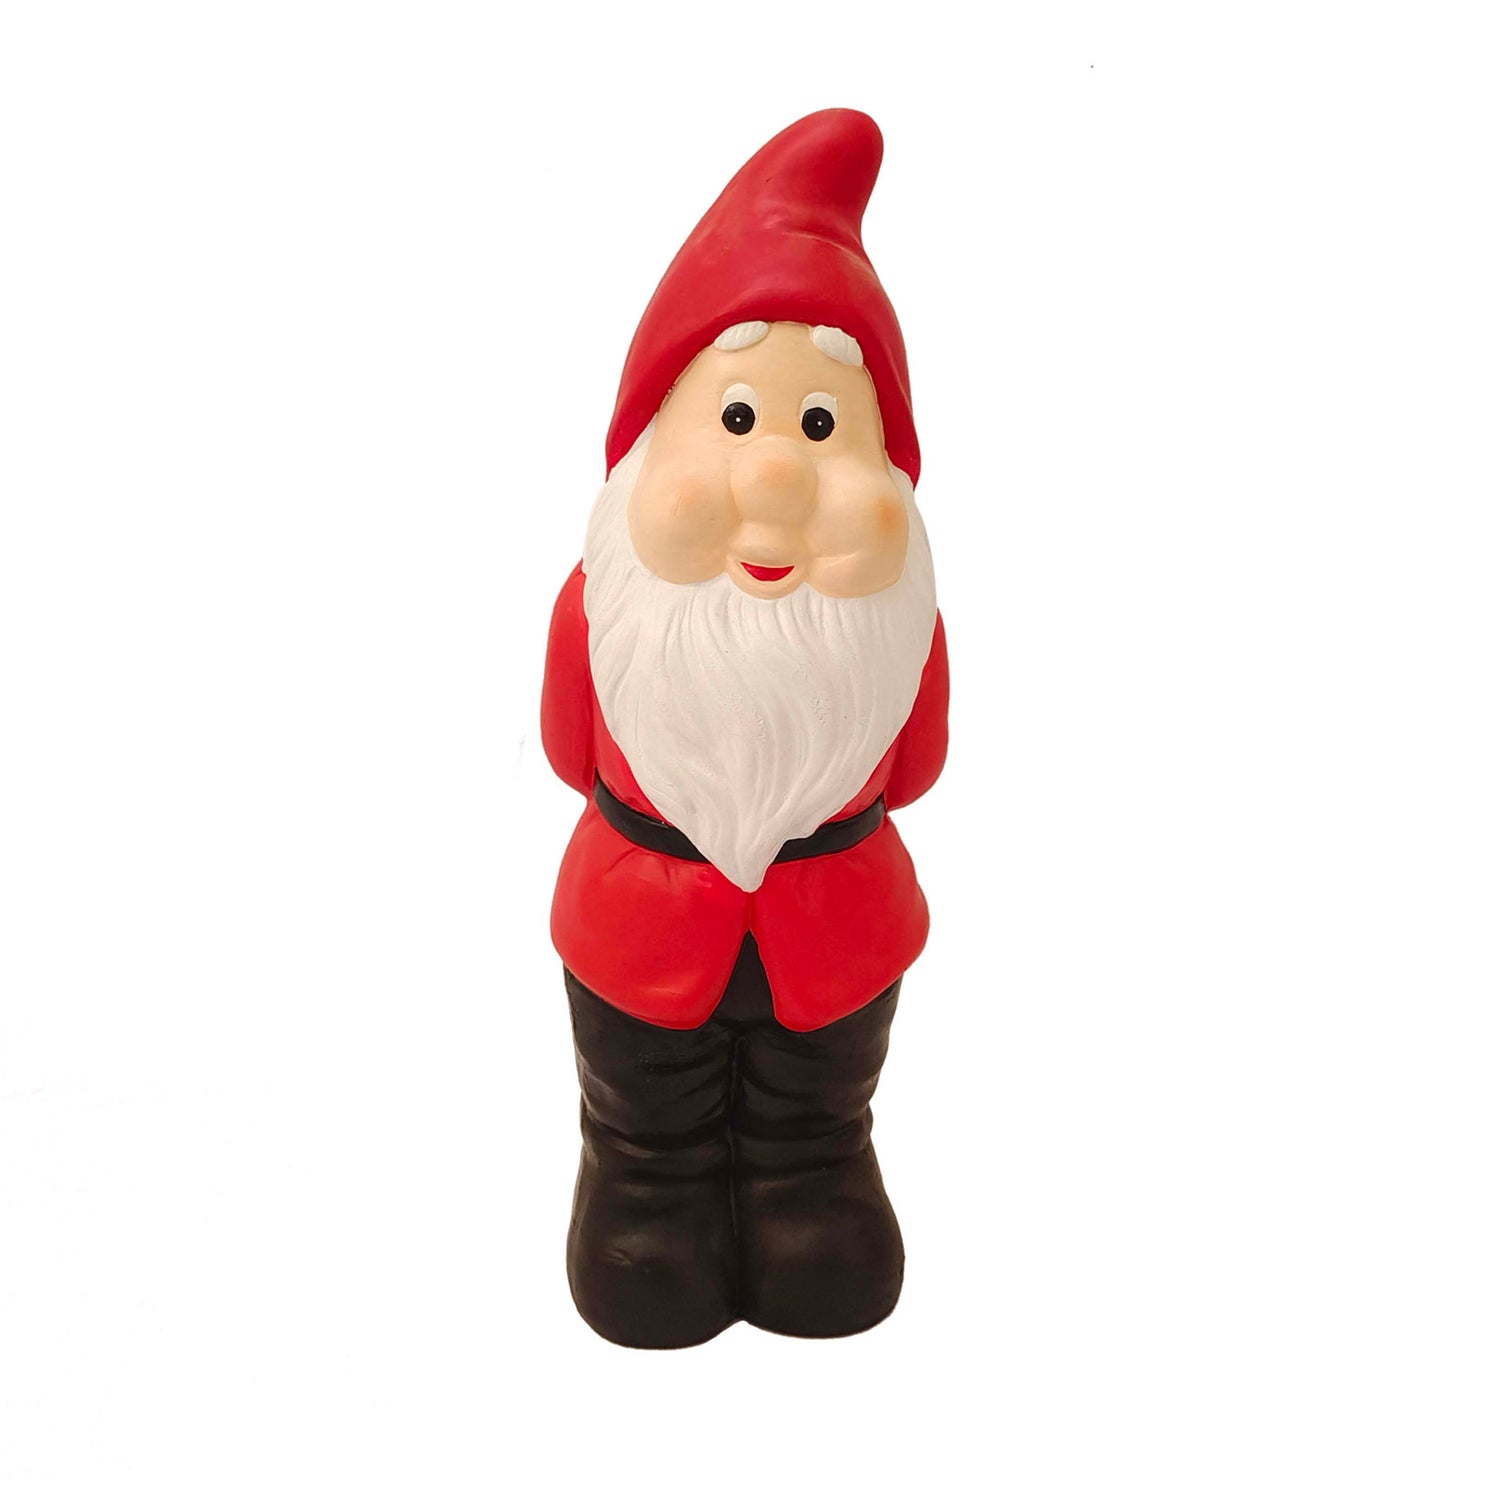 Painted Terracotta Red & Black Gnome Statue